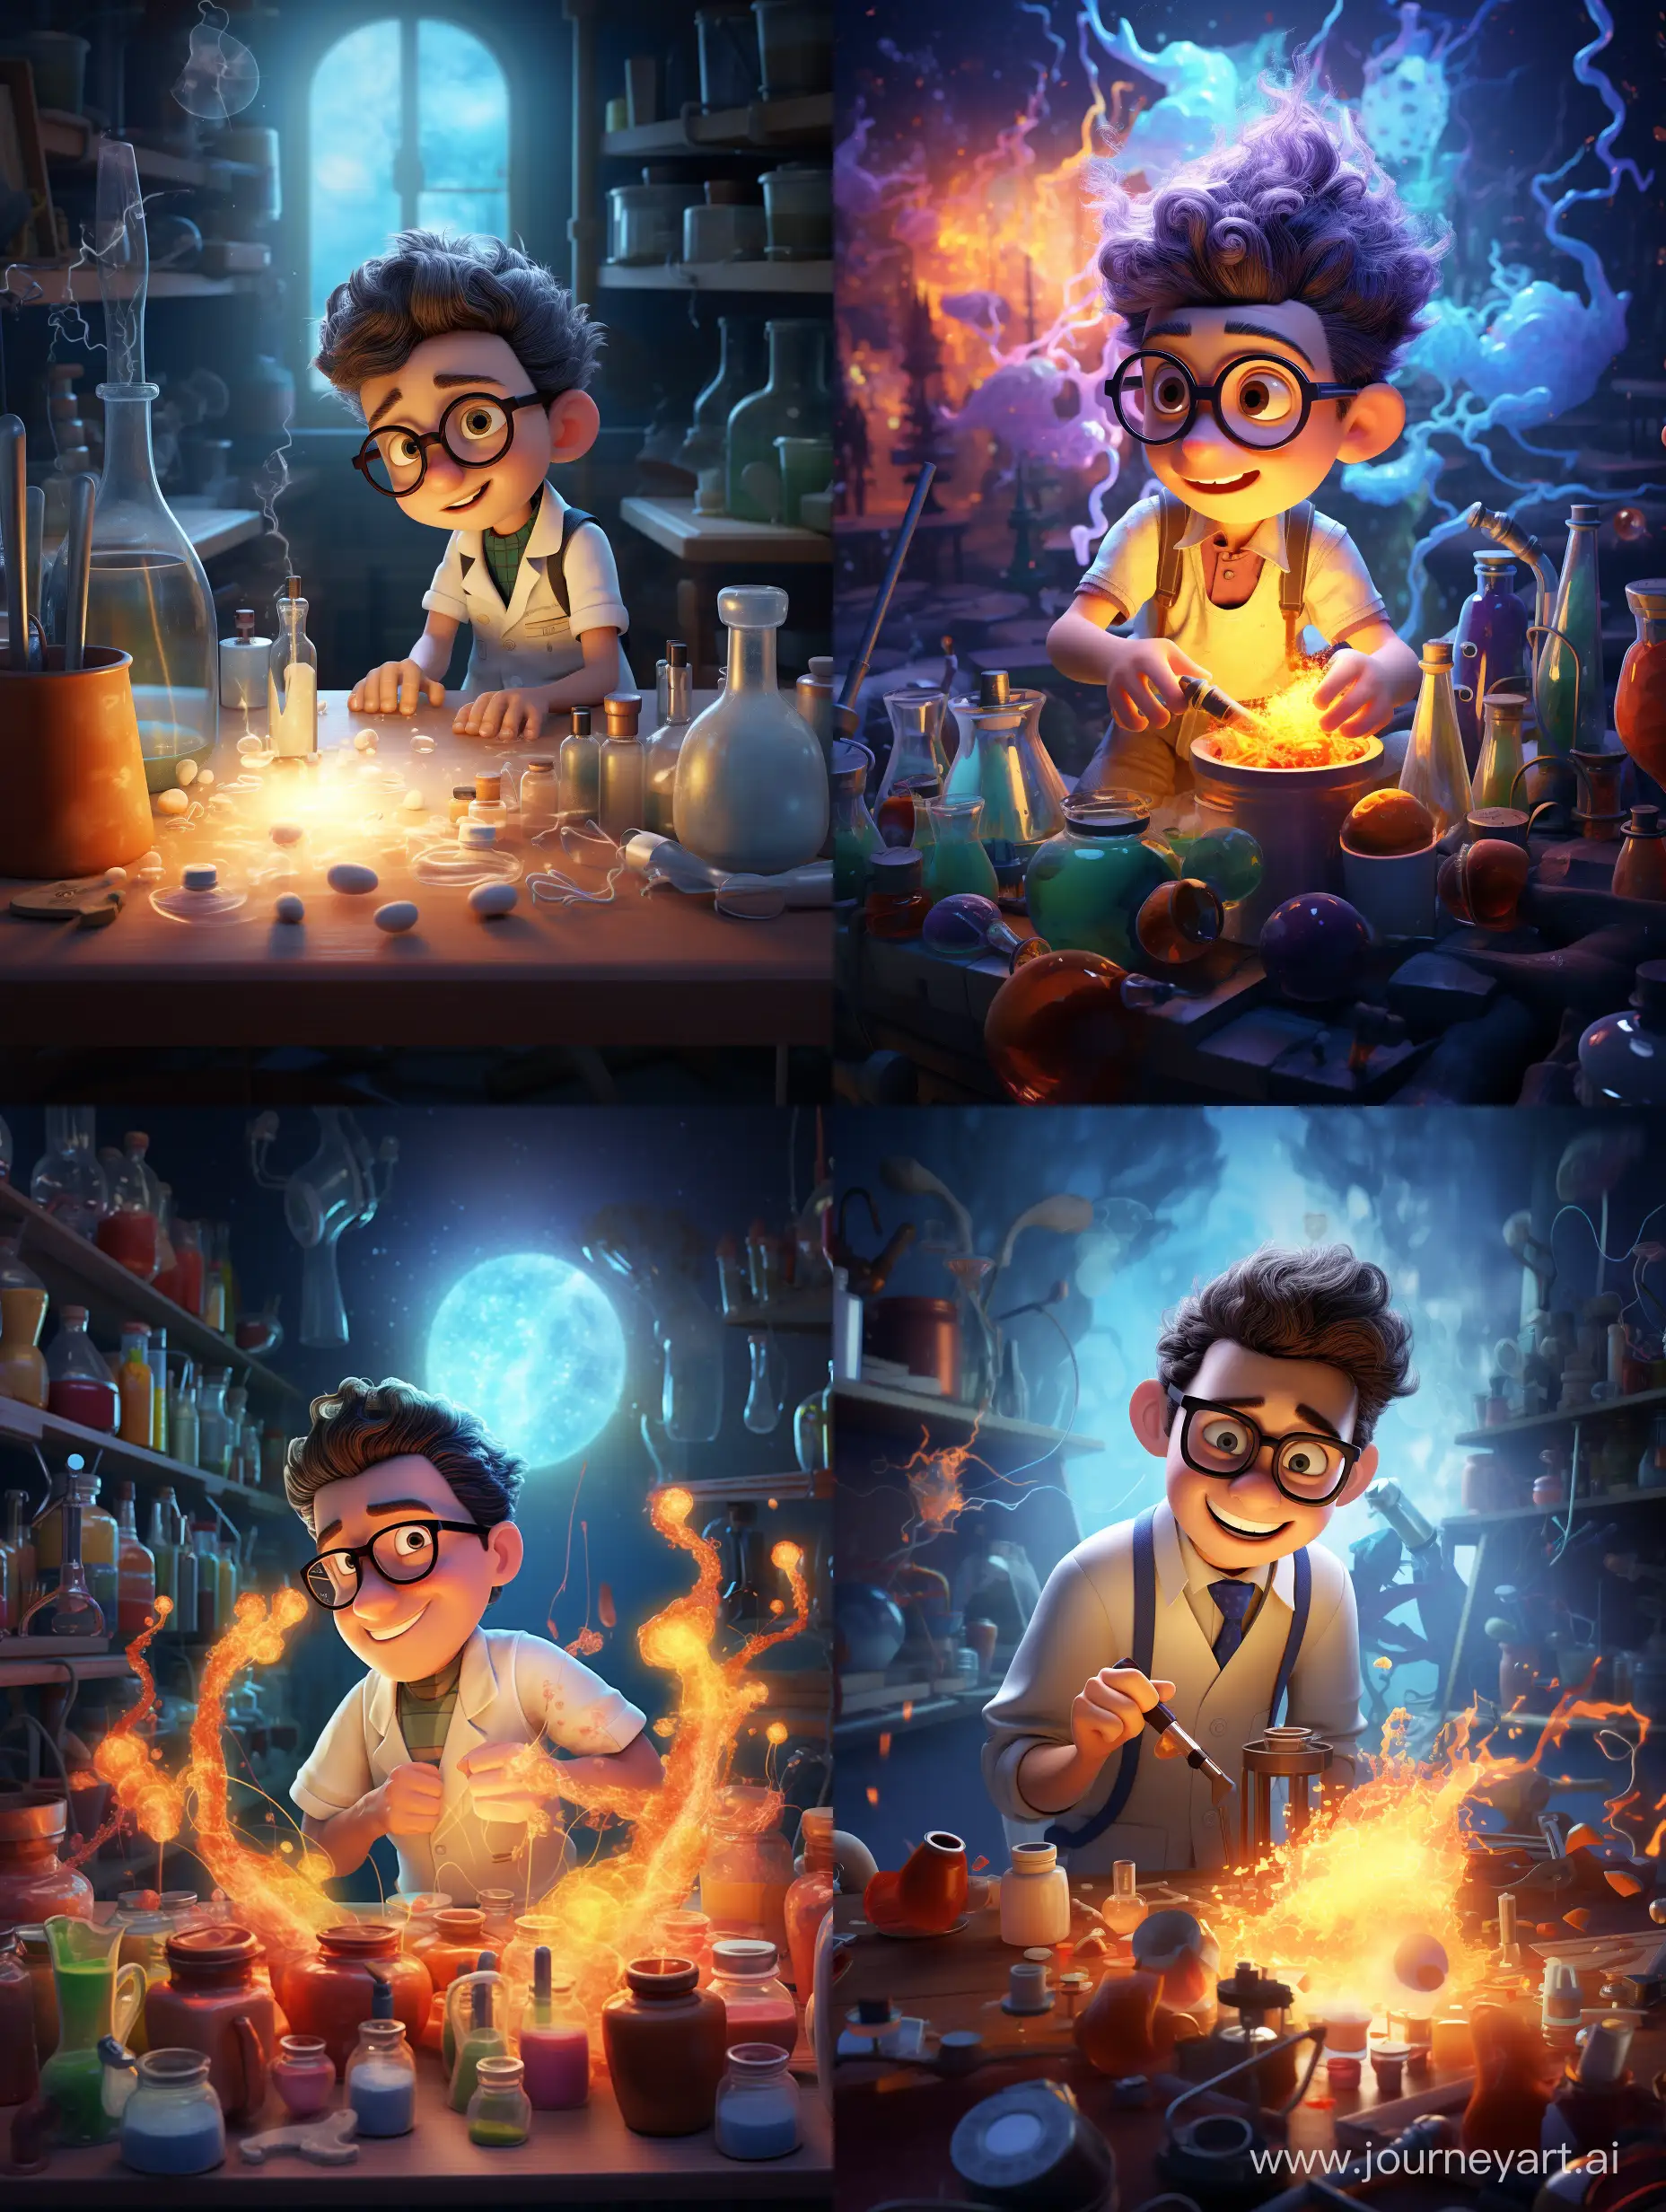 Scientist-Mixing-Chemicals-in-Pixar-Style